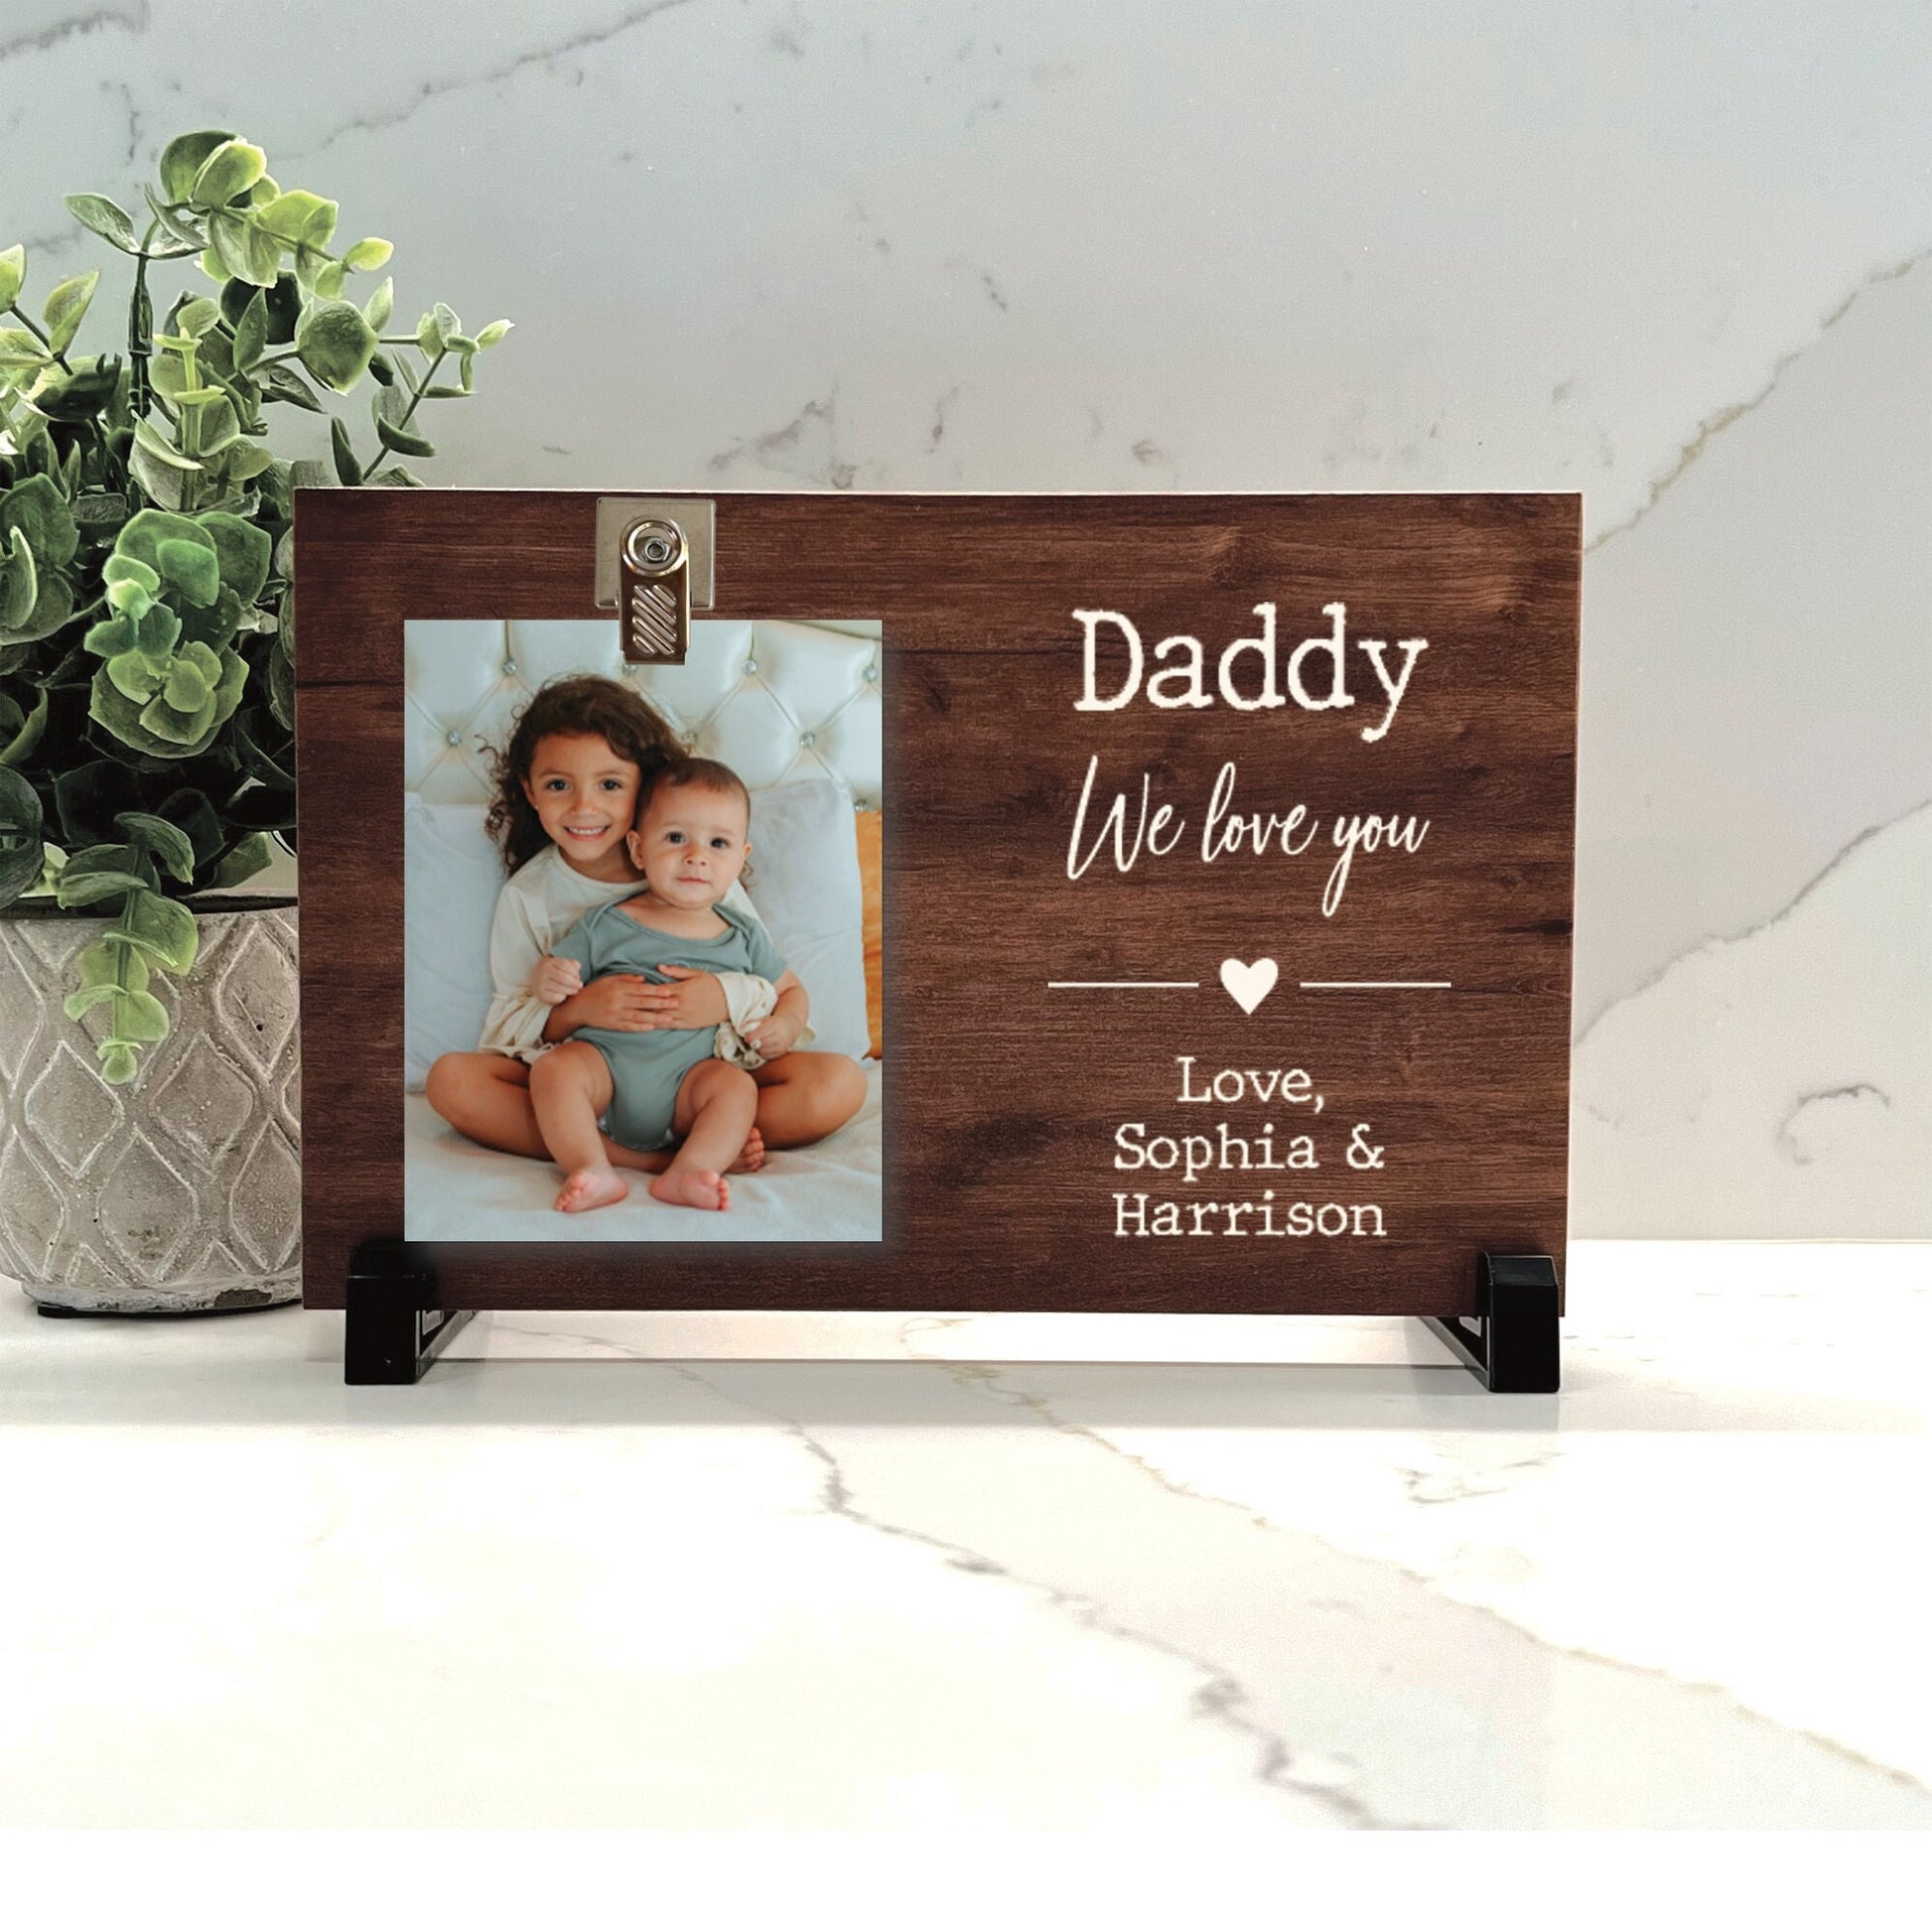 Daddy Frame, We love you Frame, Personalized Frame, Personalized Gift for Daddy, Father, Personalized Wood Frame from kids, Wood choice